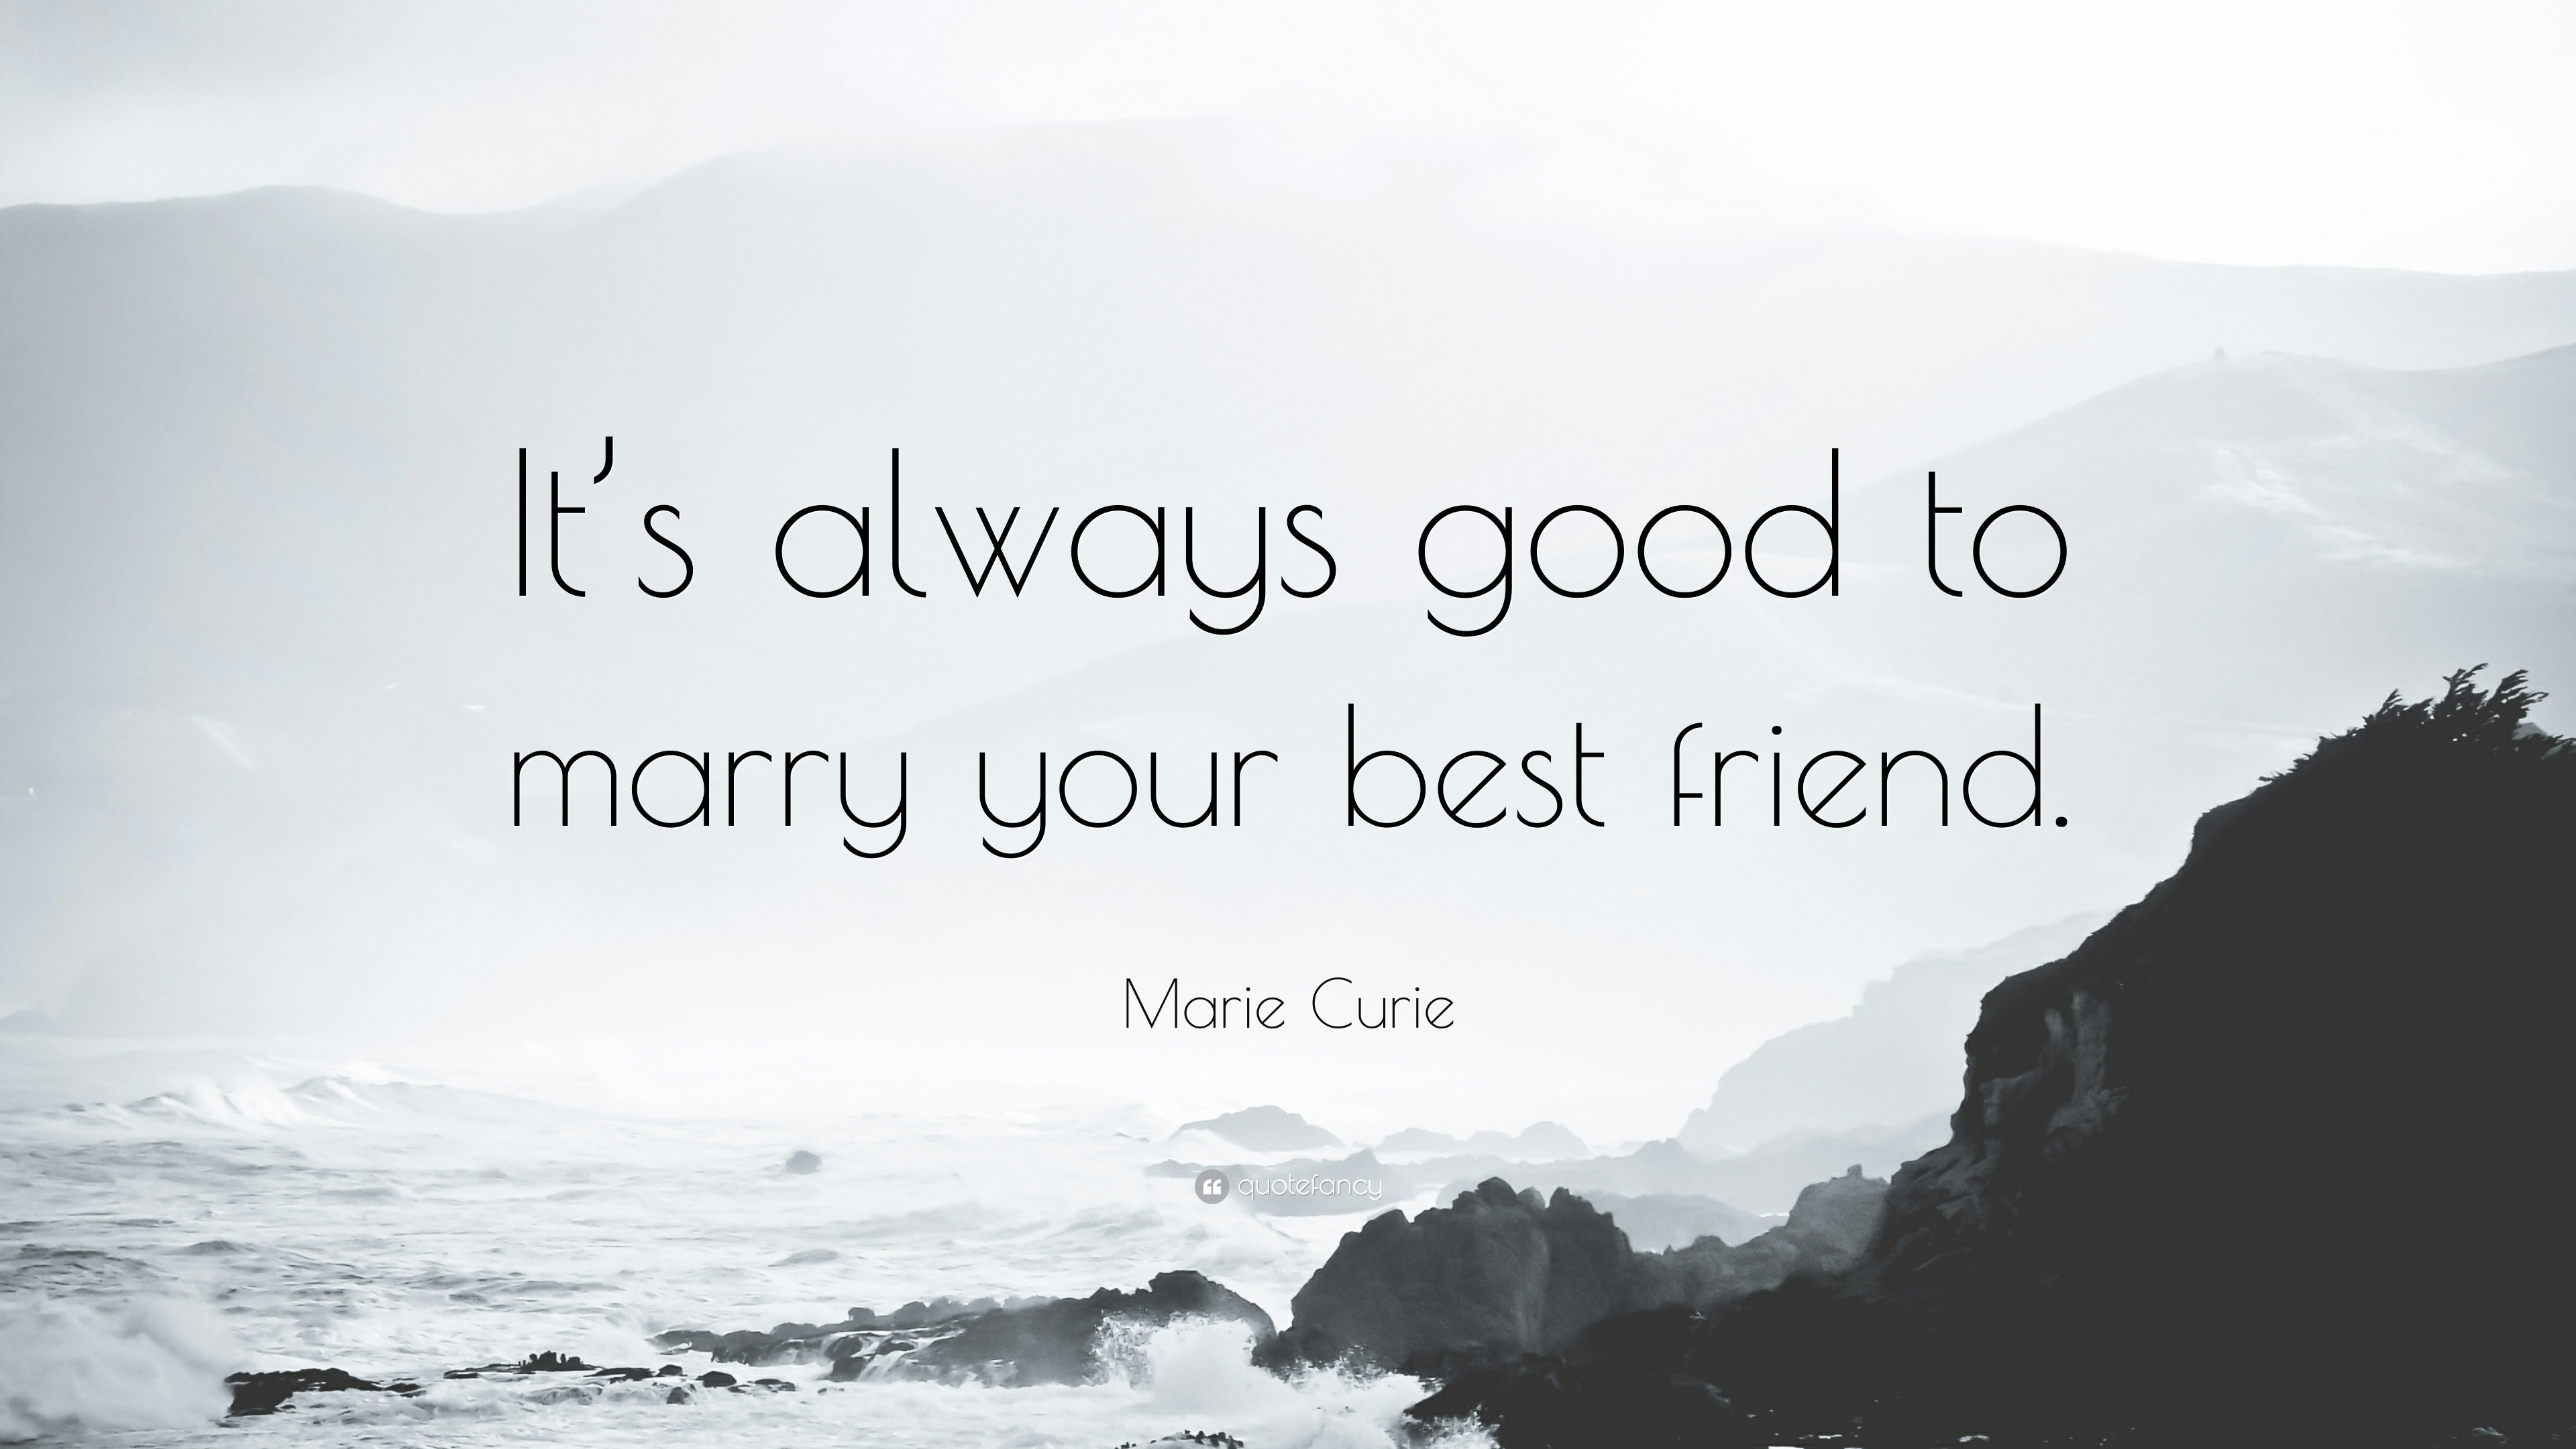 3840x2160 Marie Curie Quote: “It's always good to marry your best friend.”